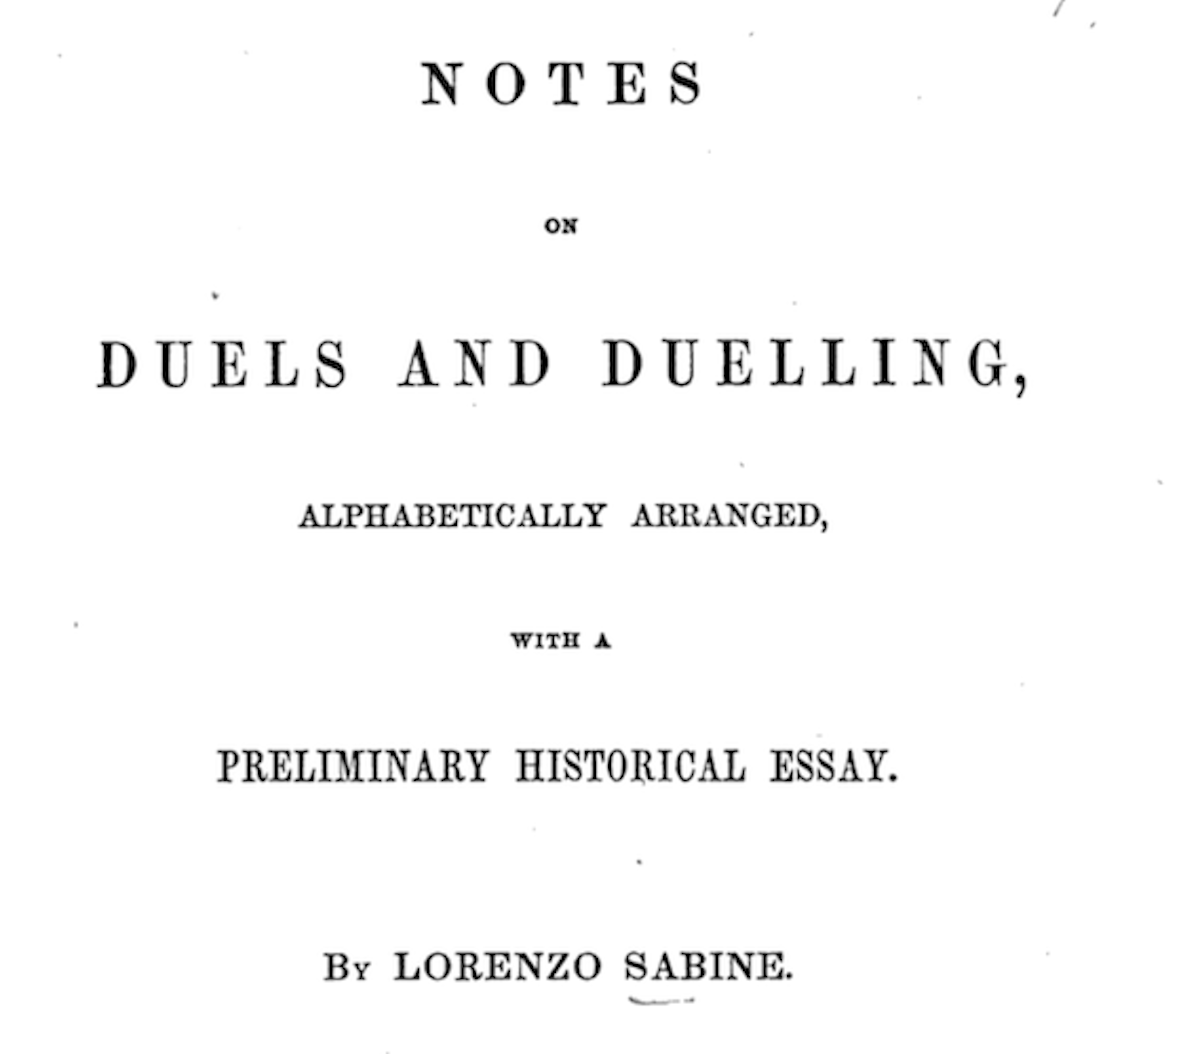 Lorenzo Sabine's Notes on Duels and Duelling, published in Boston in 1885.